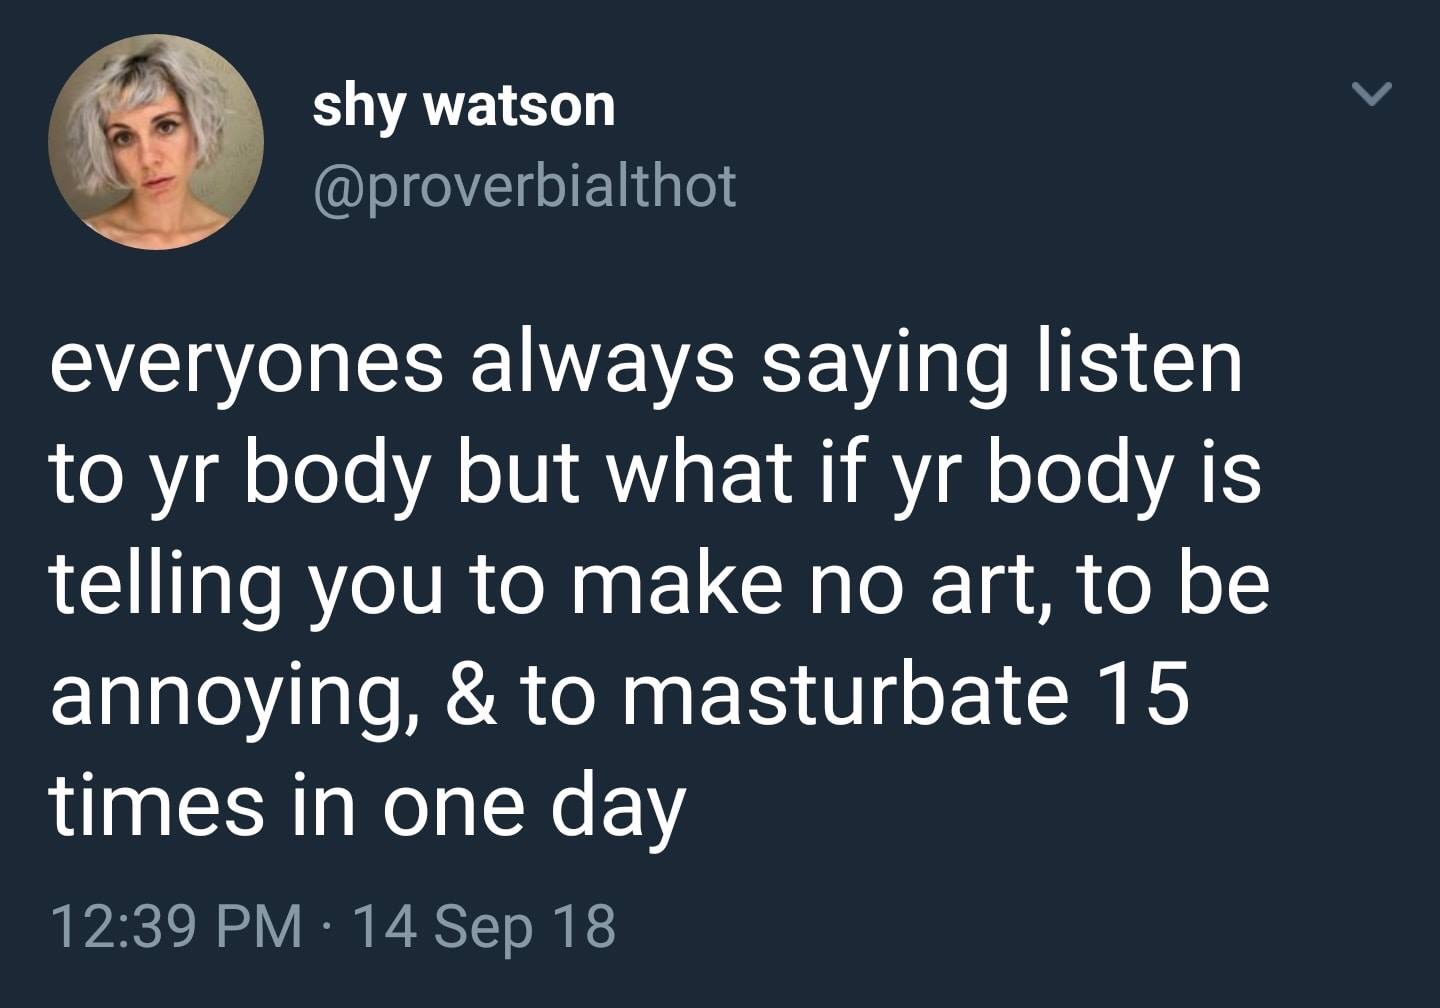 shy watson everyones always saying listen to yr body but what if yr body is telling you to make no art, to be annoying, & to masturbate 15 times in one day 14 Sep 18